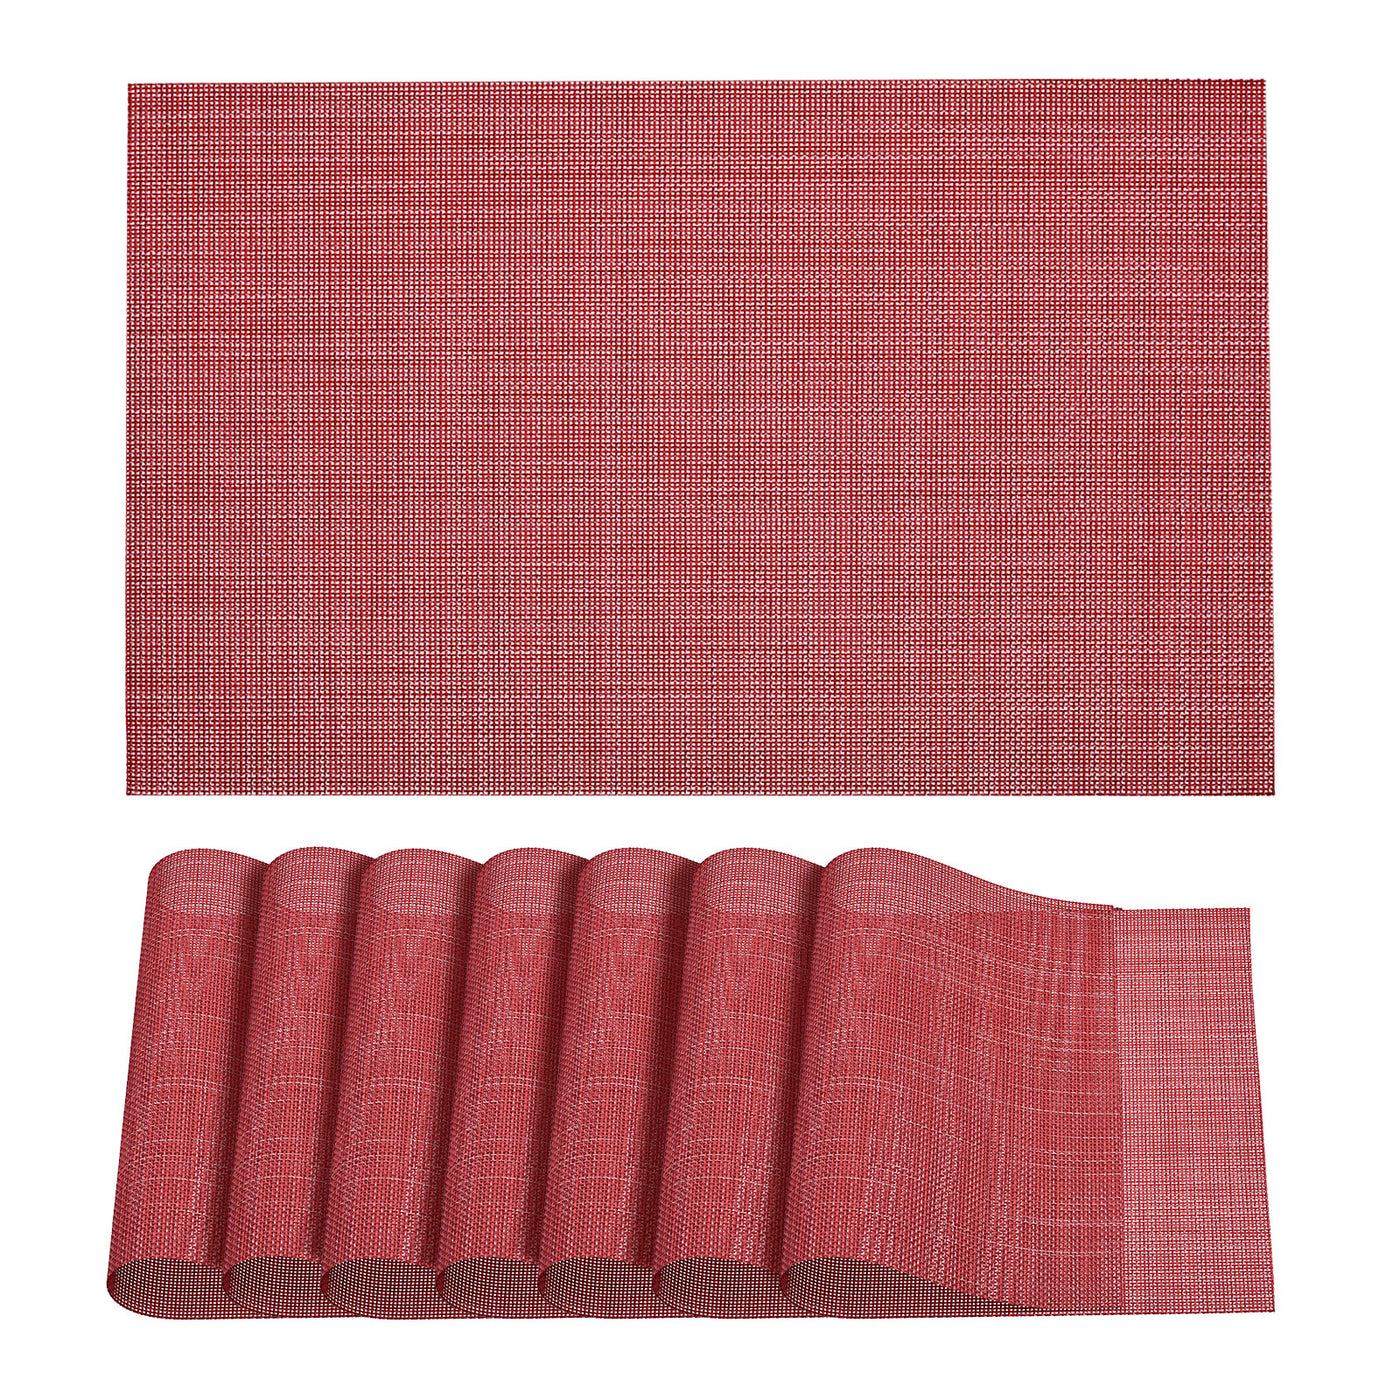 uxcell Uxcell Place Mats, 450x300mm Table Mats Set of 8 PVC Washable Woven Placemat Red